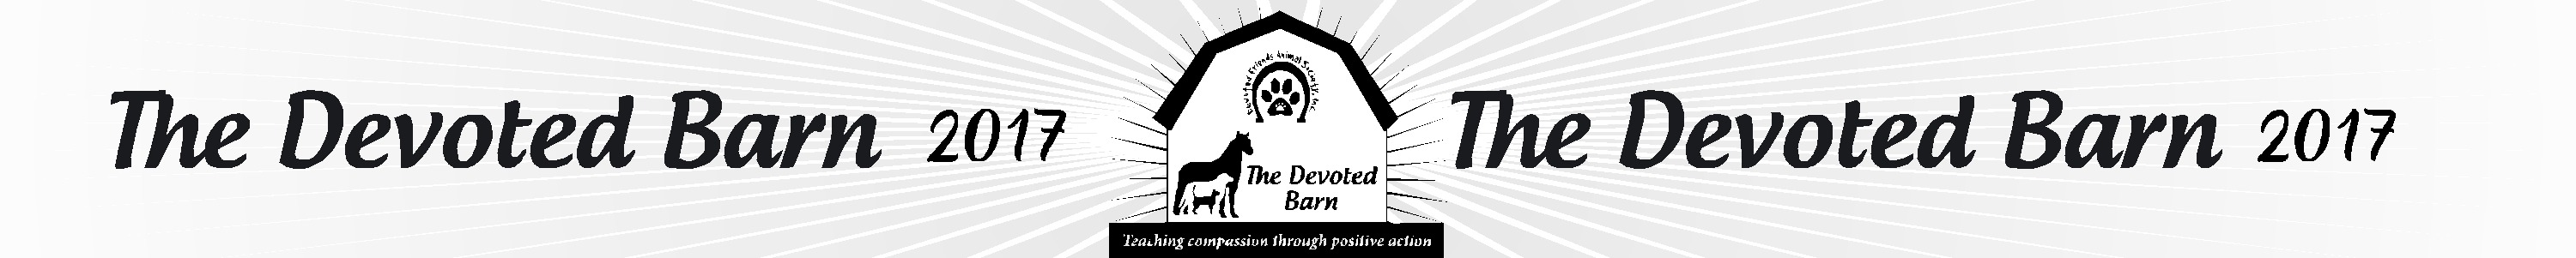 images/The Devoted Barn - Beanies Group.gif